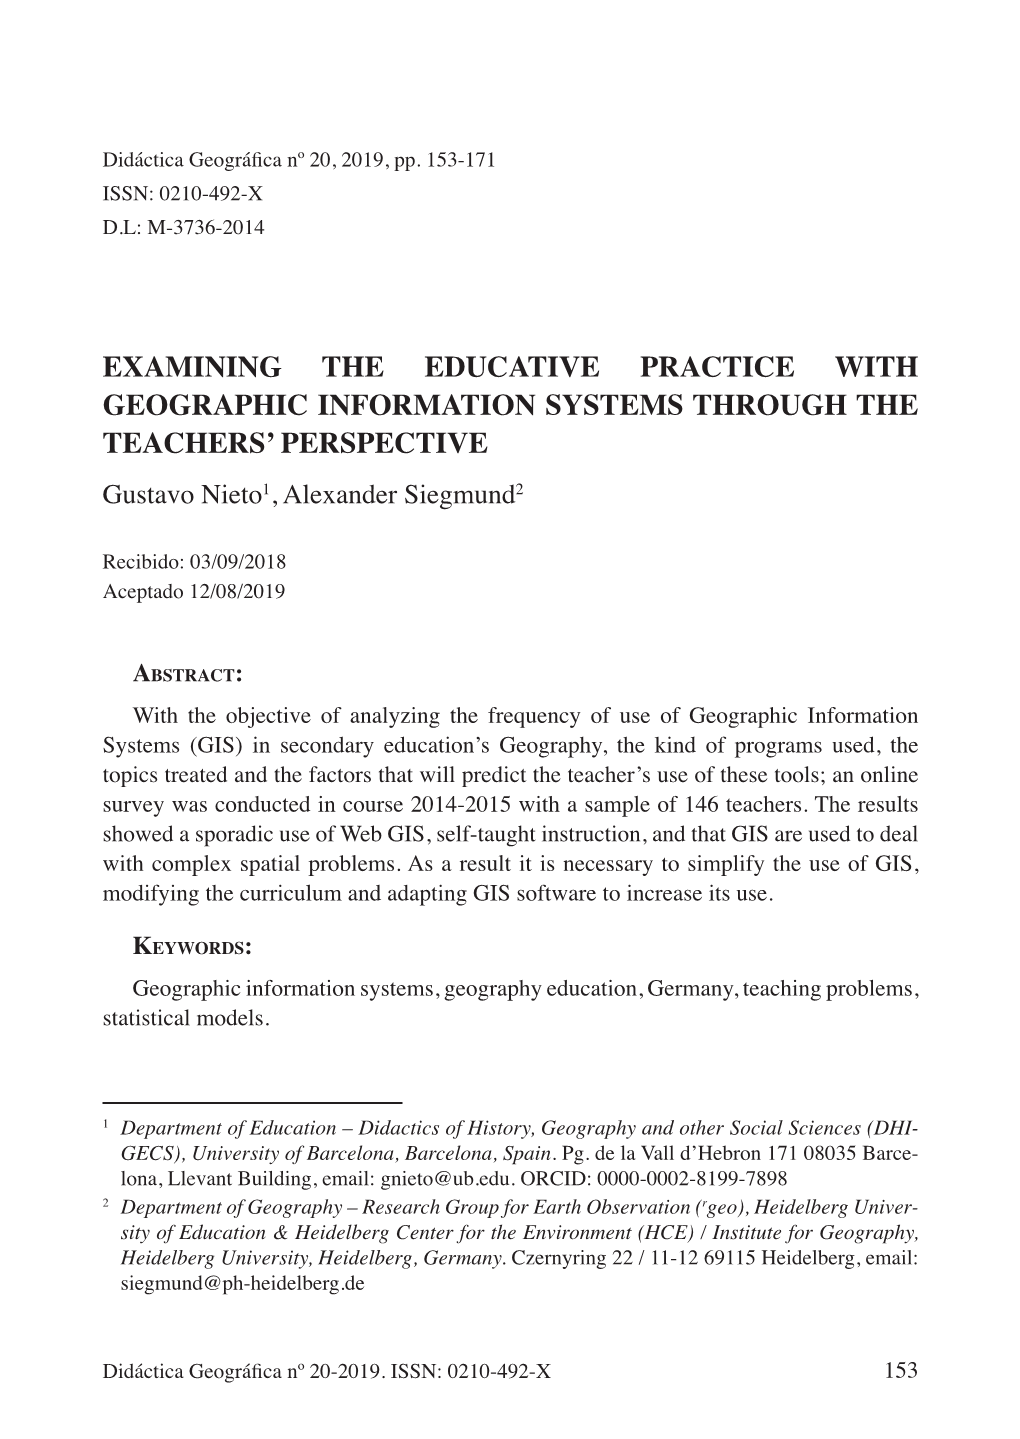 EXAMINING the EDUCATIVE PRACTICE with GEOGRAPHIC INFORMATION SYSTEMS THROUGH the TEACHERS’ PERSPECTIVE Gustavo Nieto1, Alexander Siegmund2